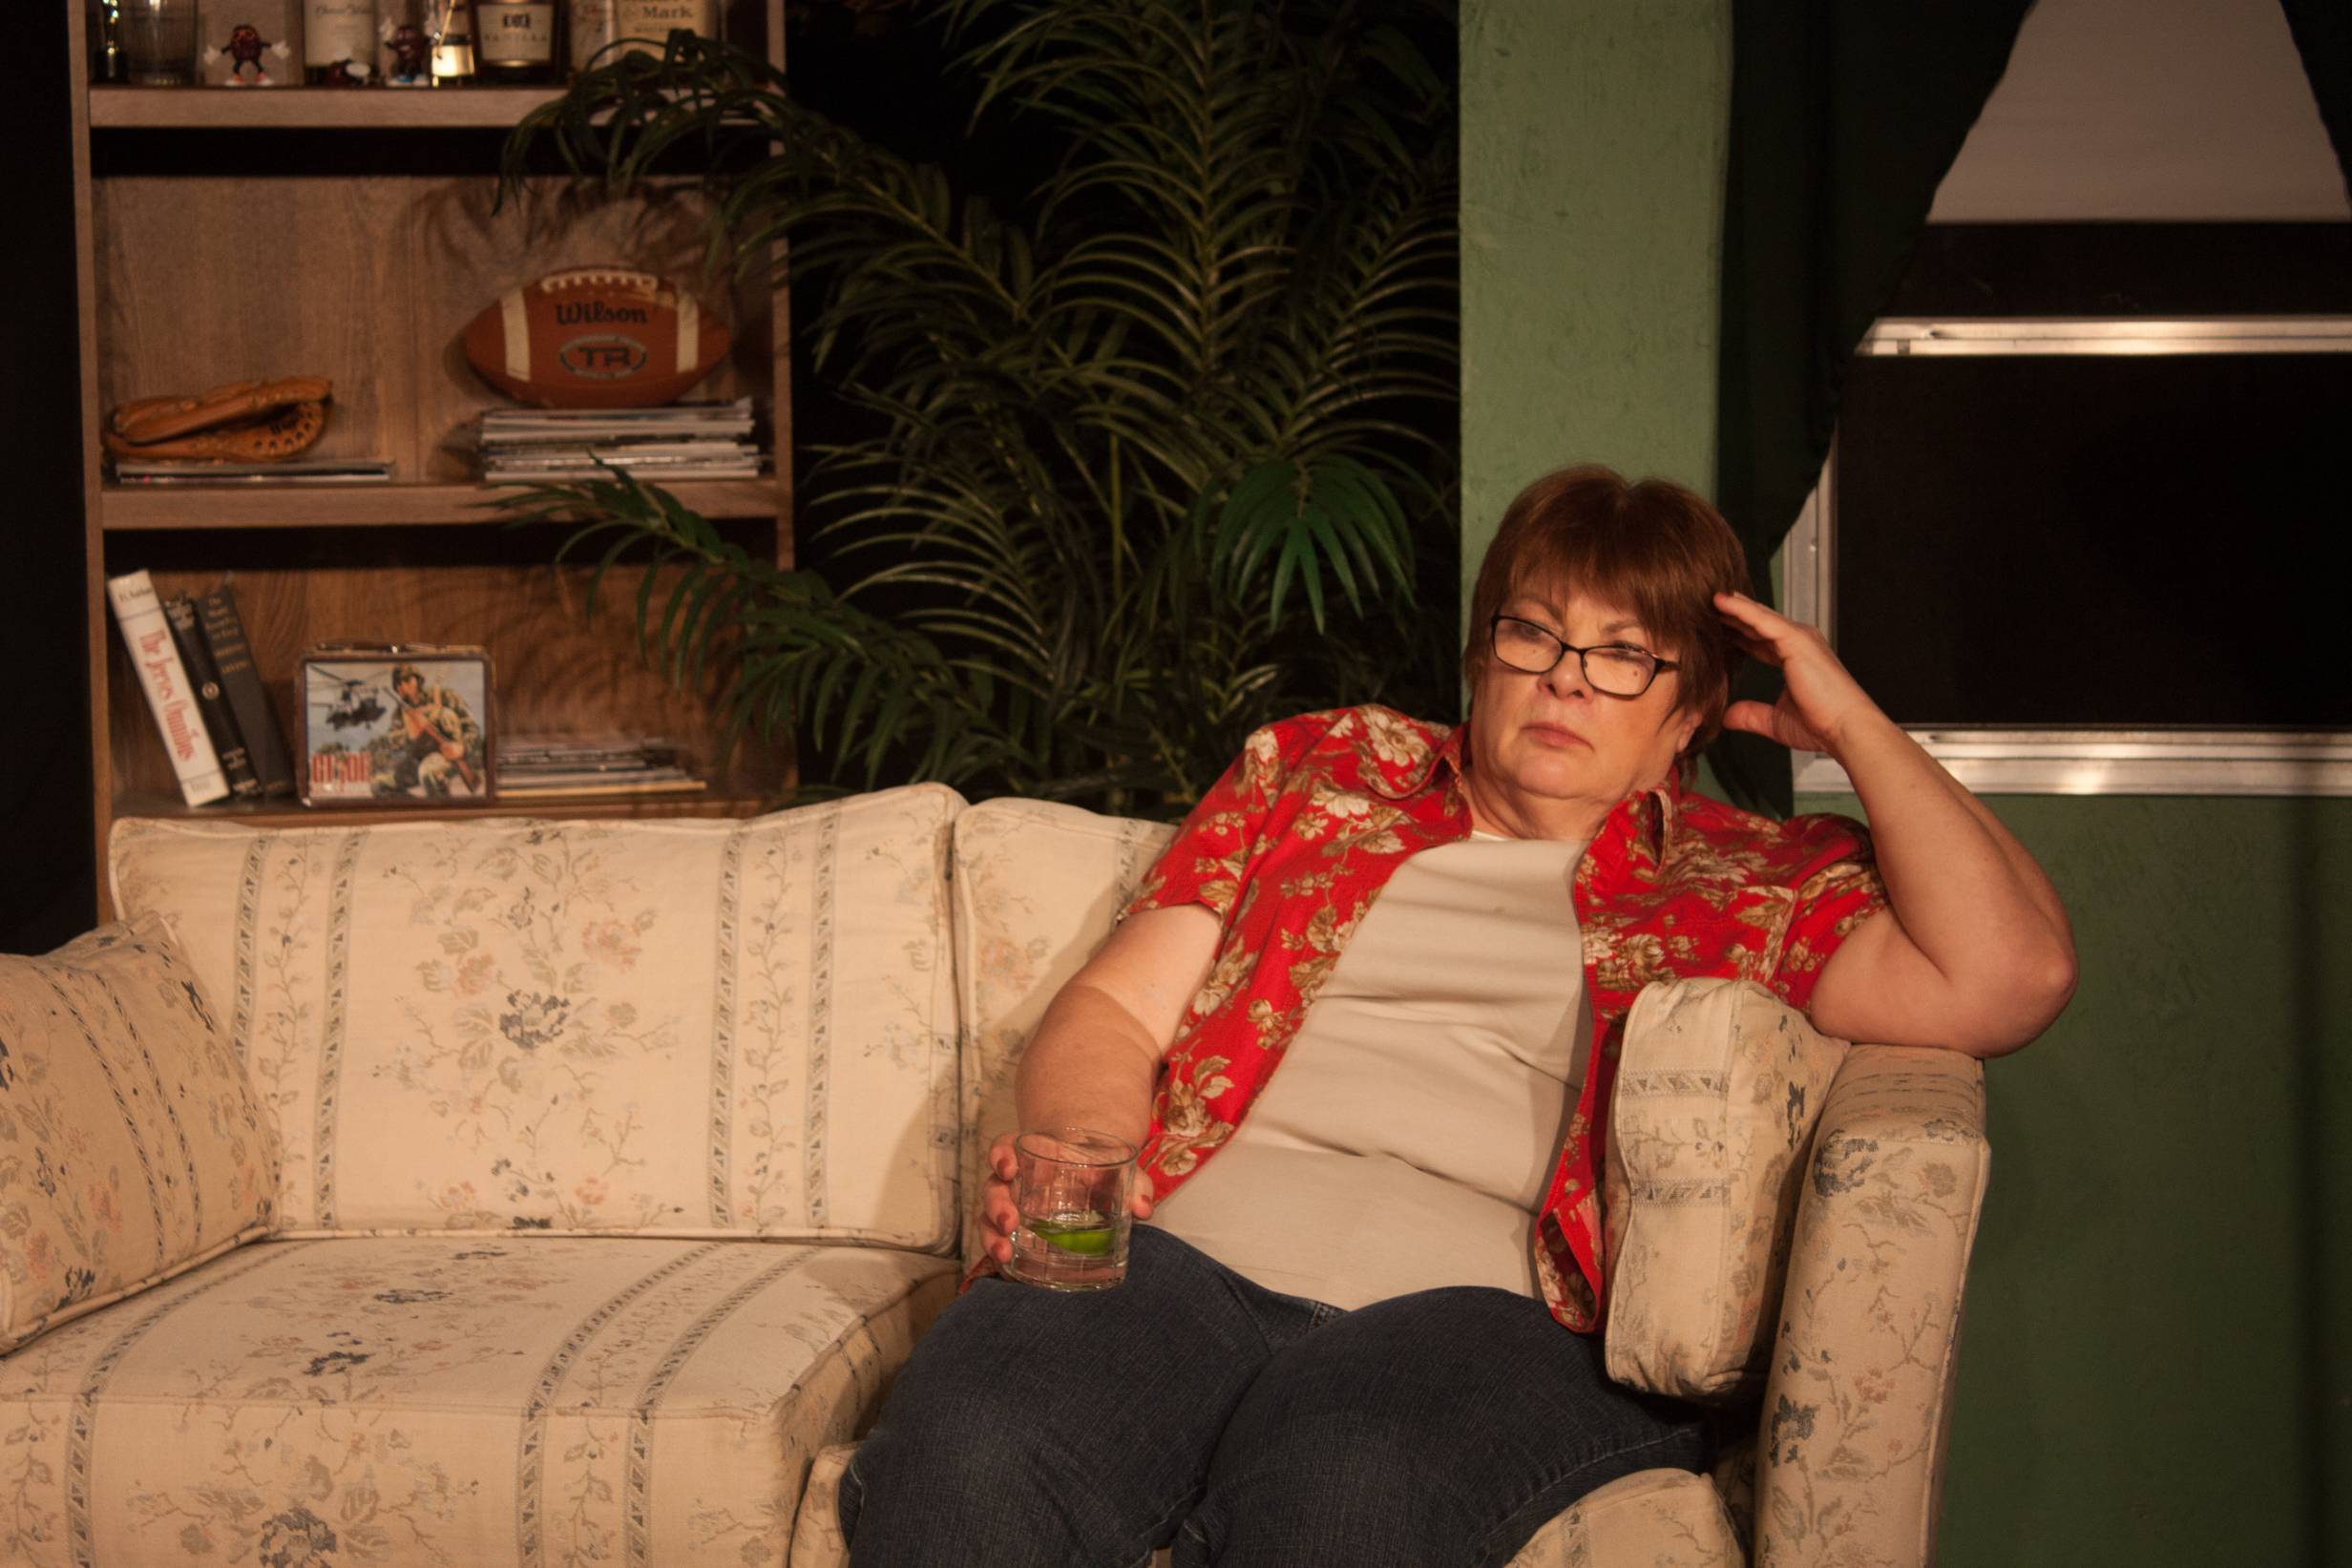 Twin City Theatre bring Neil Simon to Neil Street with The Female Odd Couple